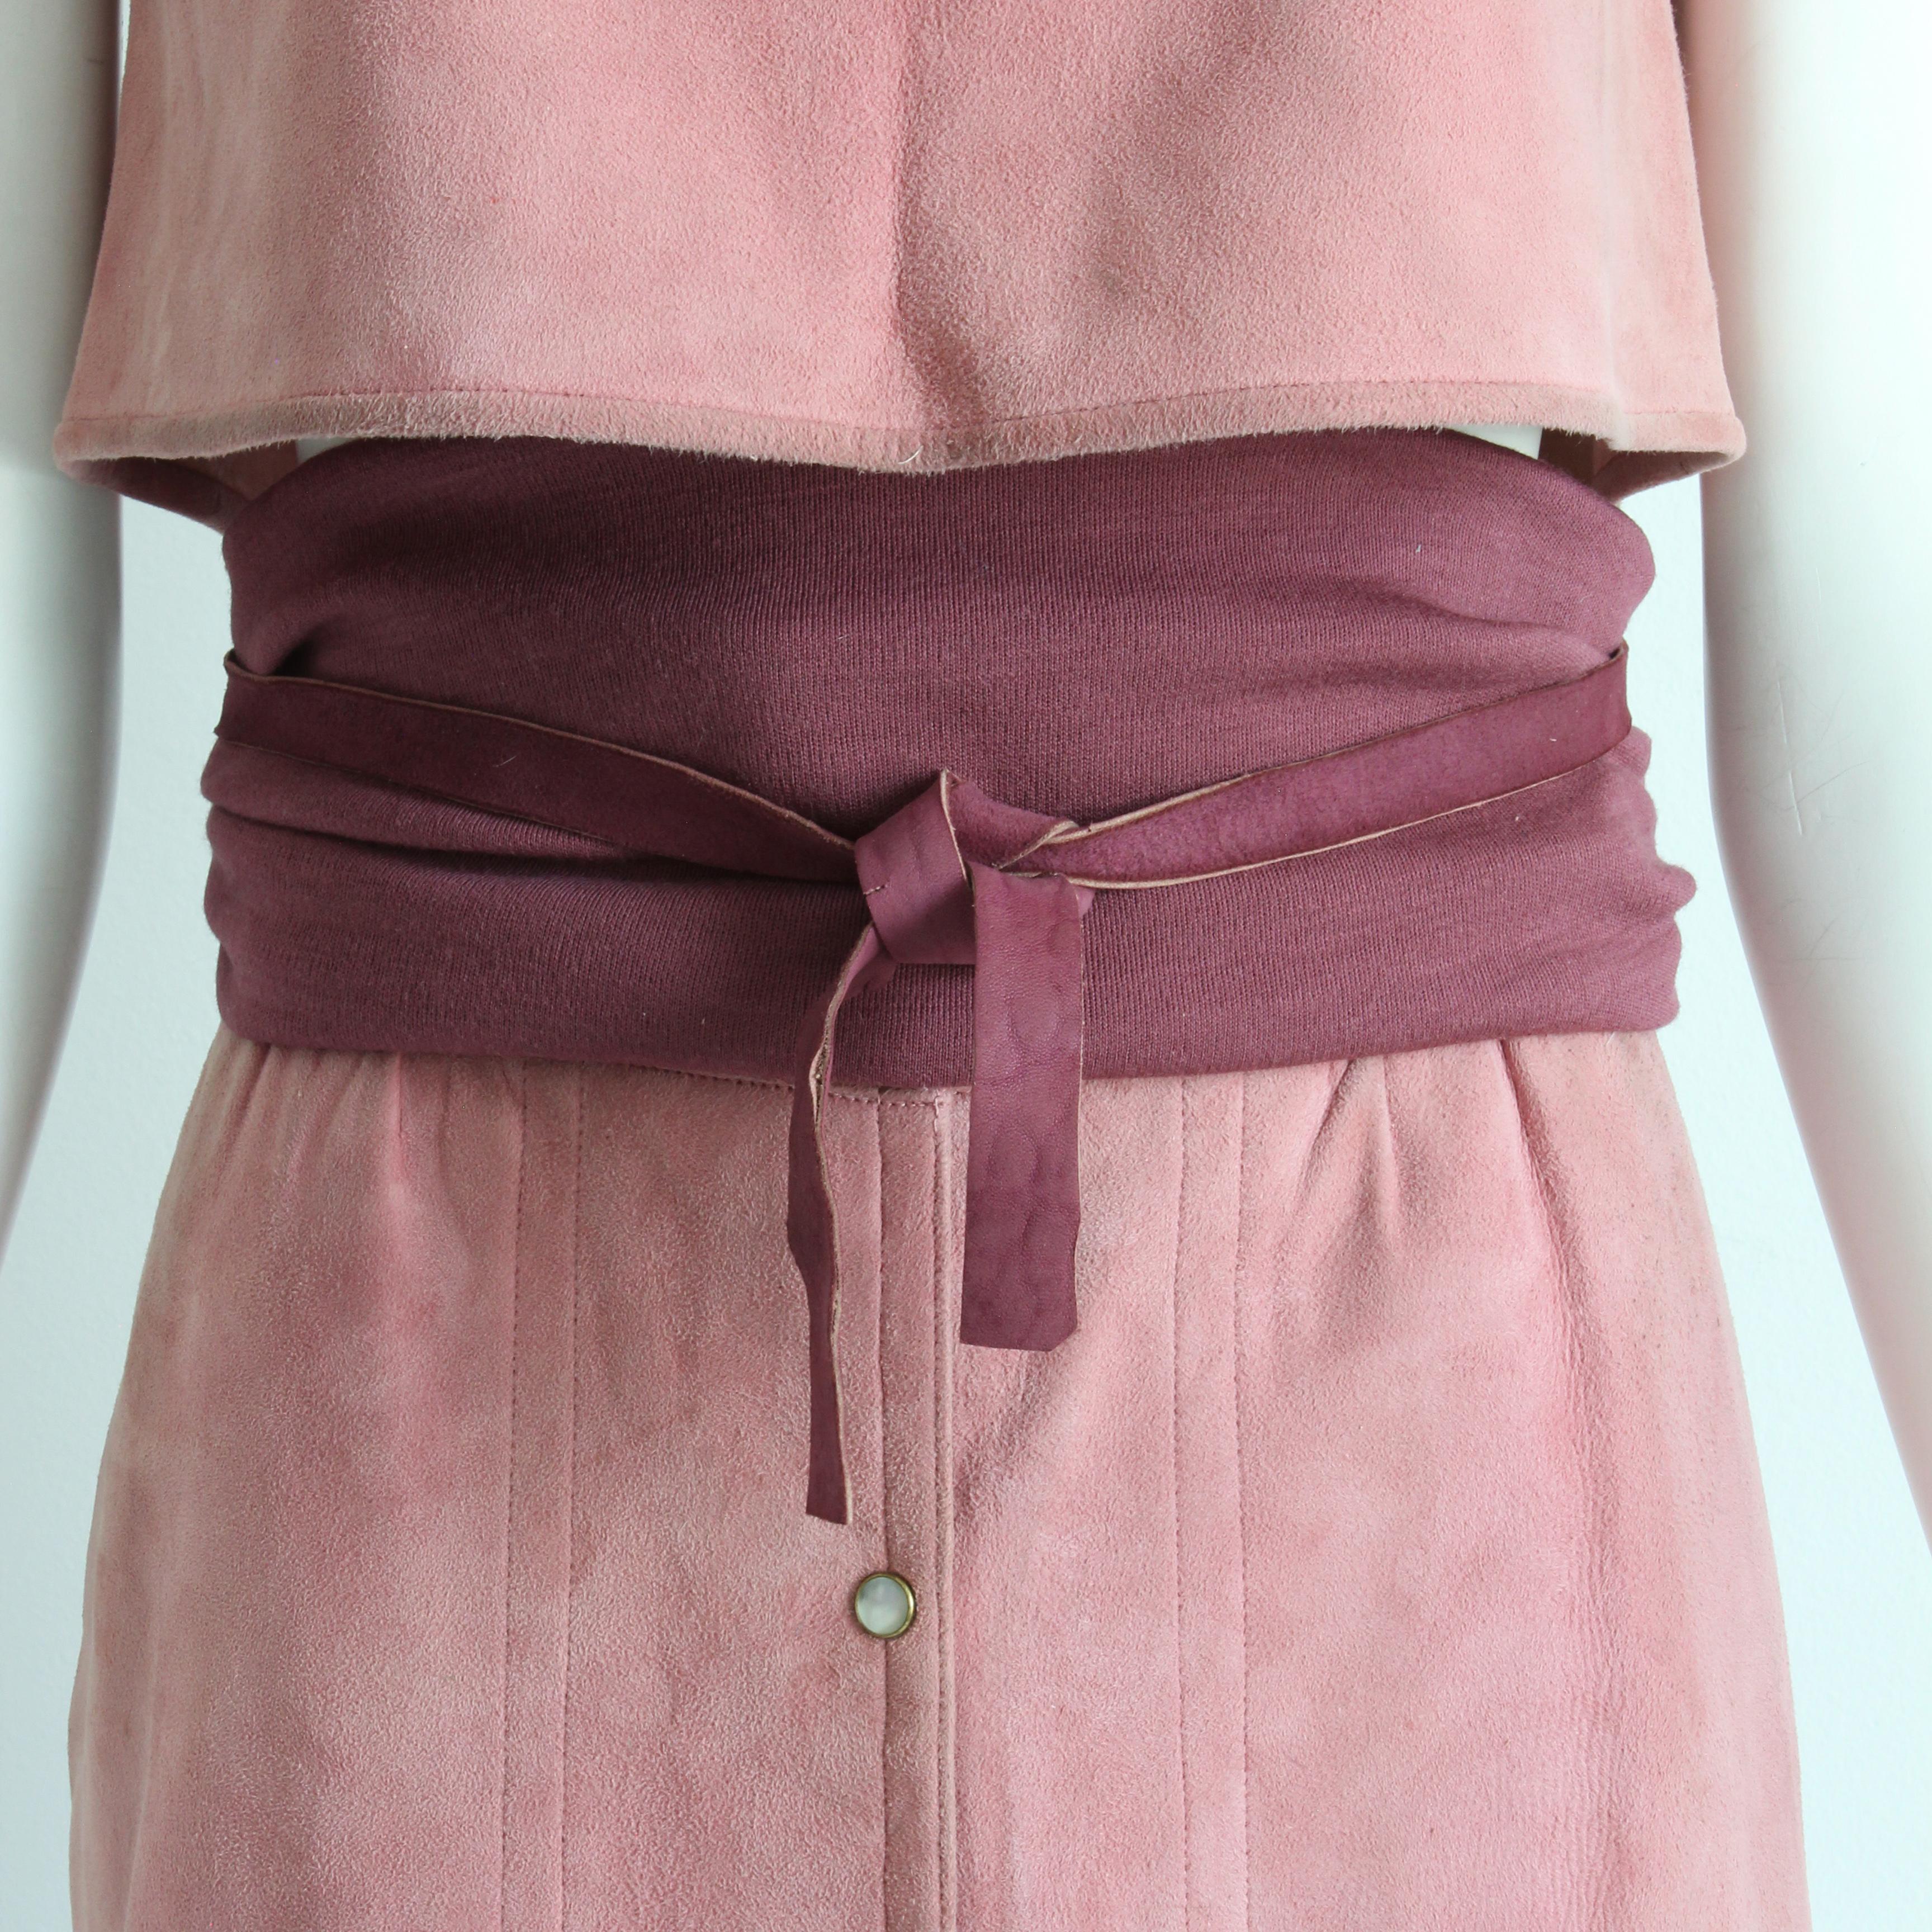 Bonnie Cashin for Sills Pale Pink Suede Skirt Set 3pc Top Skirt and Belt Rare S For Sale 7